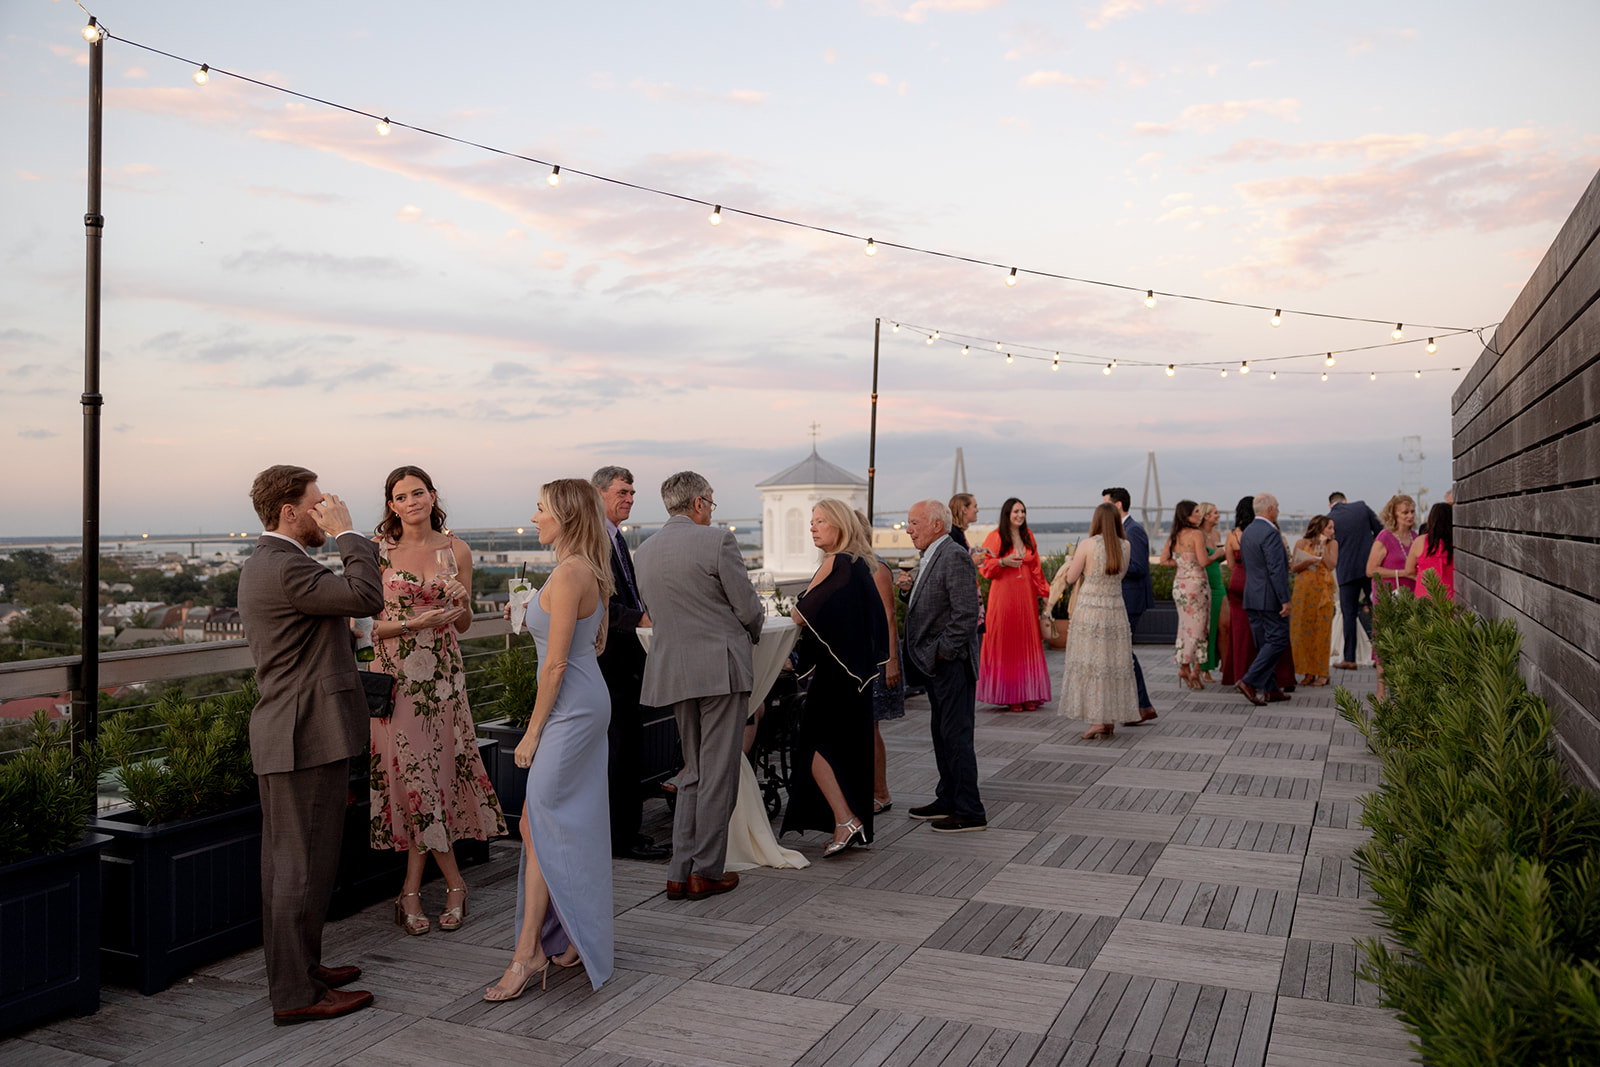 Wedding guests enjoy cocktail hour on the Dewberry hotel rooftop